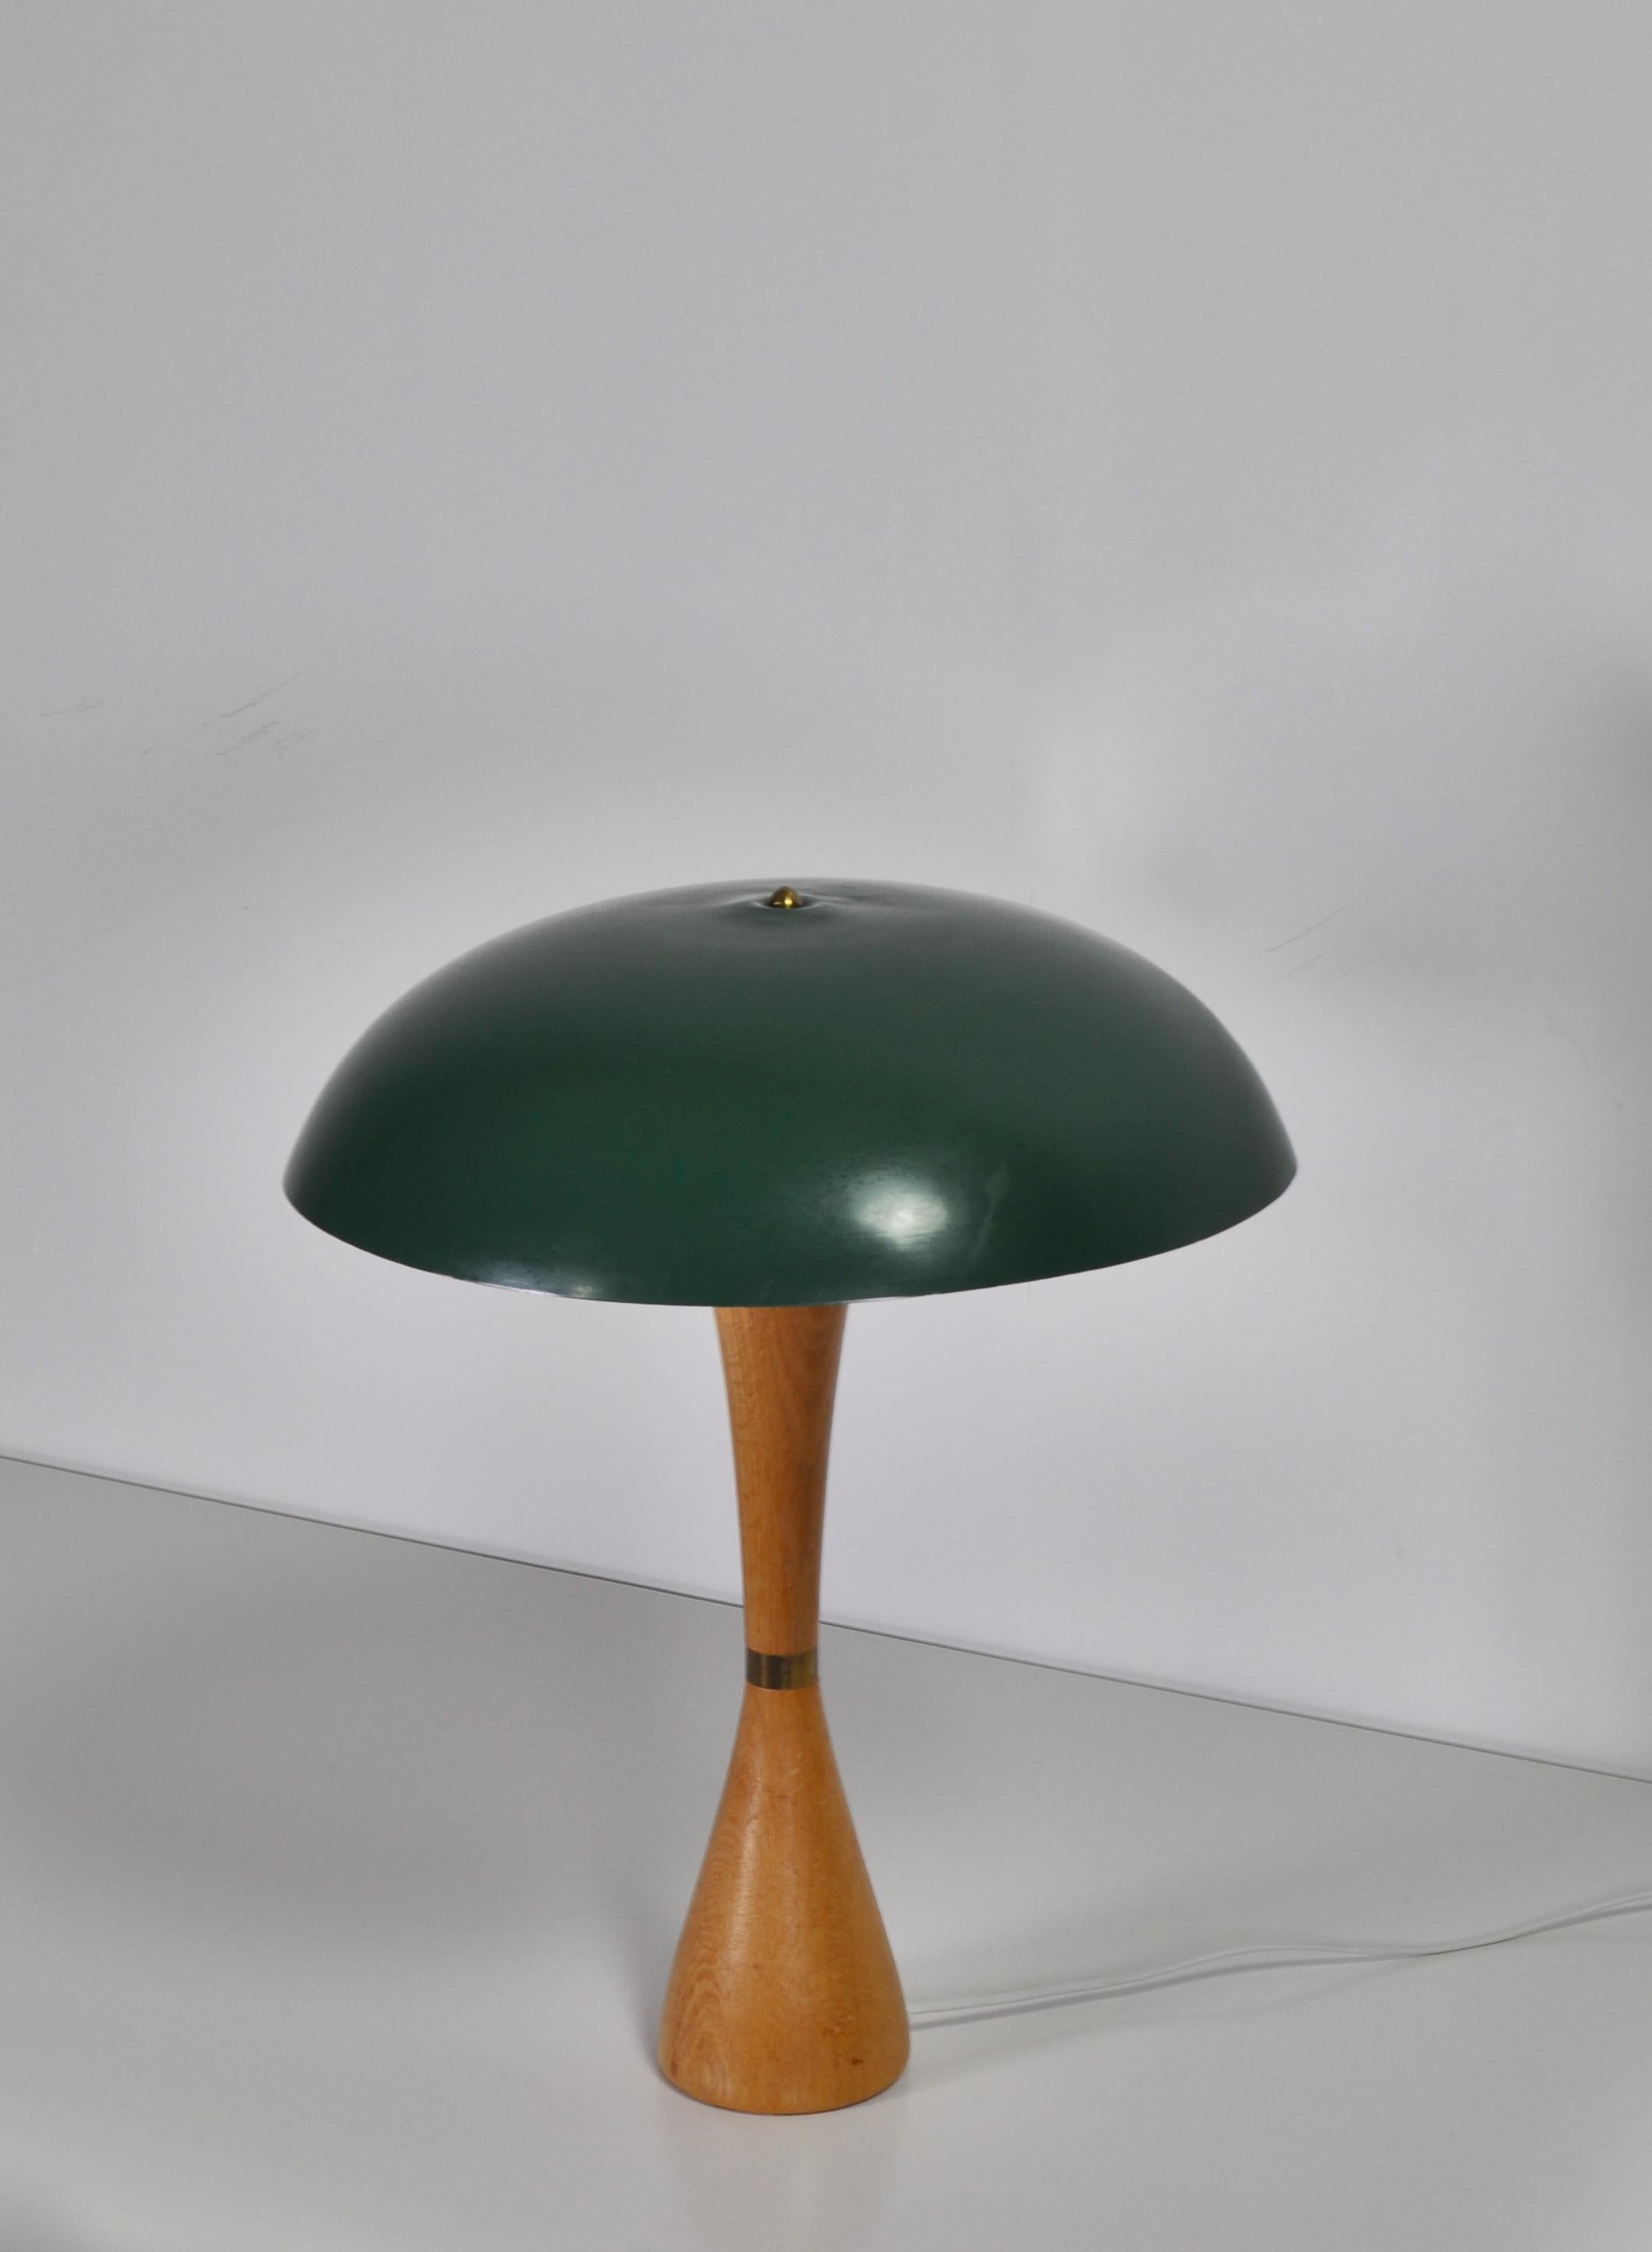 Danish 1950s Hans Bergström Table Lamp with Green Shade Made by ASEA, Sweden